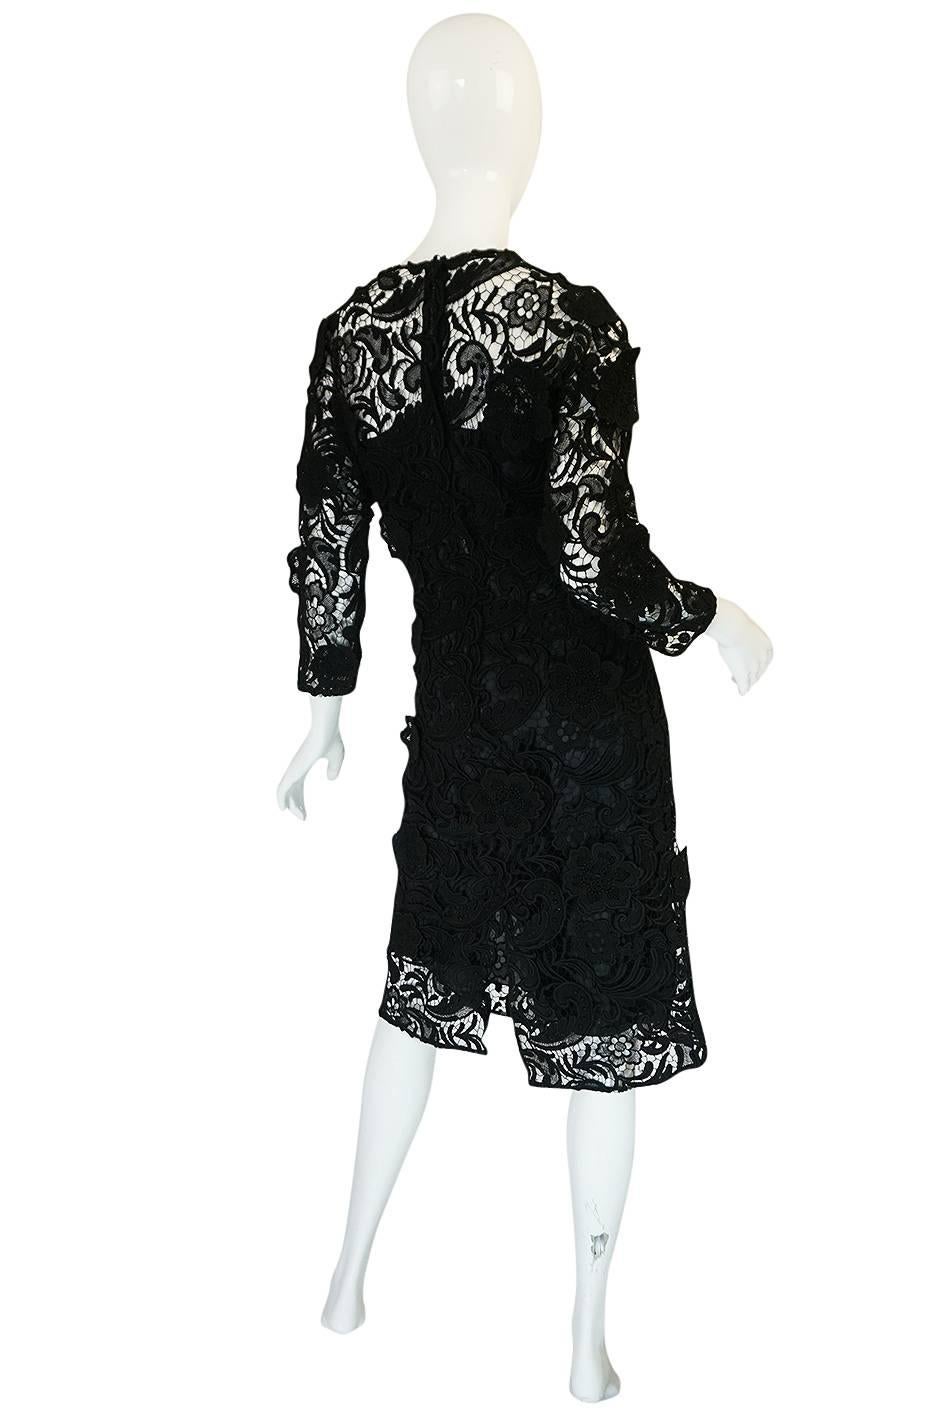 Yes, this is that lace dress from the Fall 2008 runway. When this came out it sold out before it hit the stores and was wait-listed world wide. And its still as good and wearable now. Maybe even more so as Miuccia always seems to design ahead of the